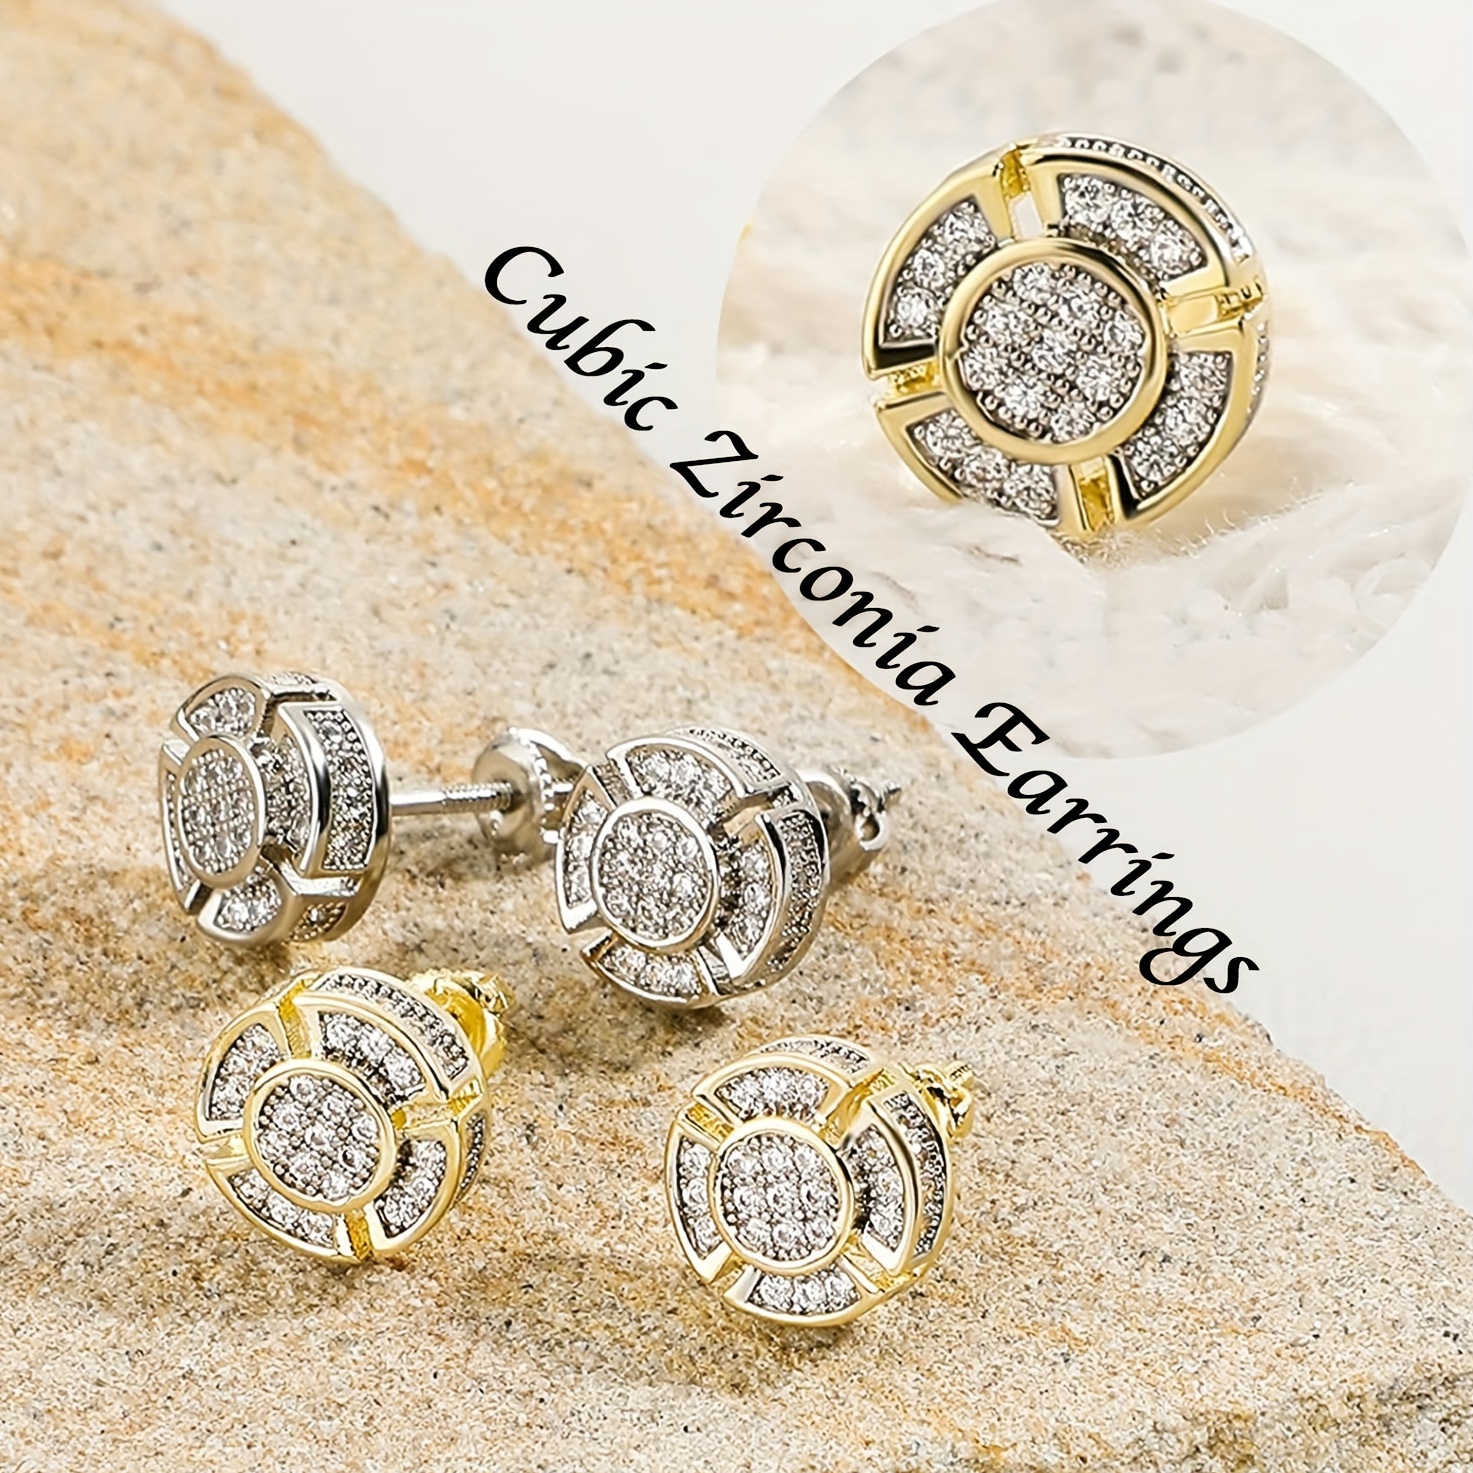 Mens Ladies 14K Gold Over Silver Lab Diamond Earrings Screw Back Studs Iced  Out aretes para hombre - Men's Earrings, Screw Back, Men's Jewelry, Hip